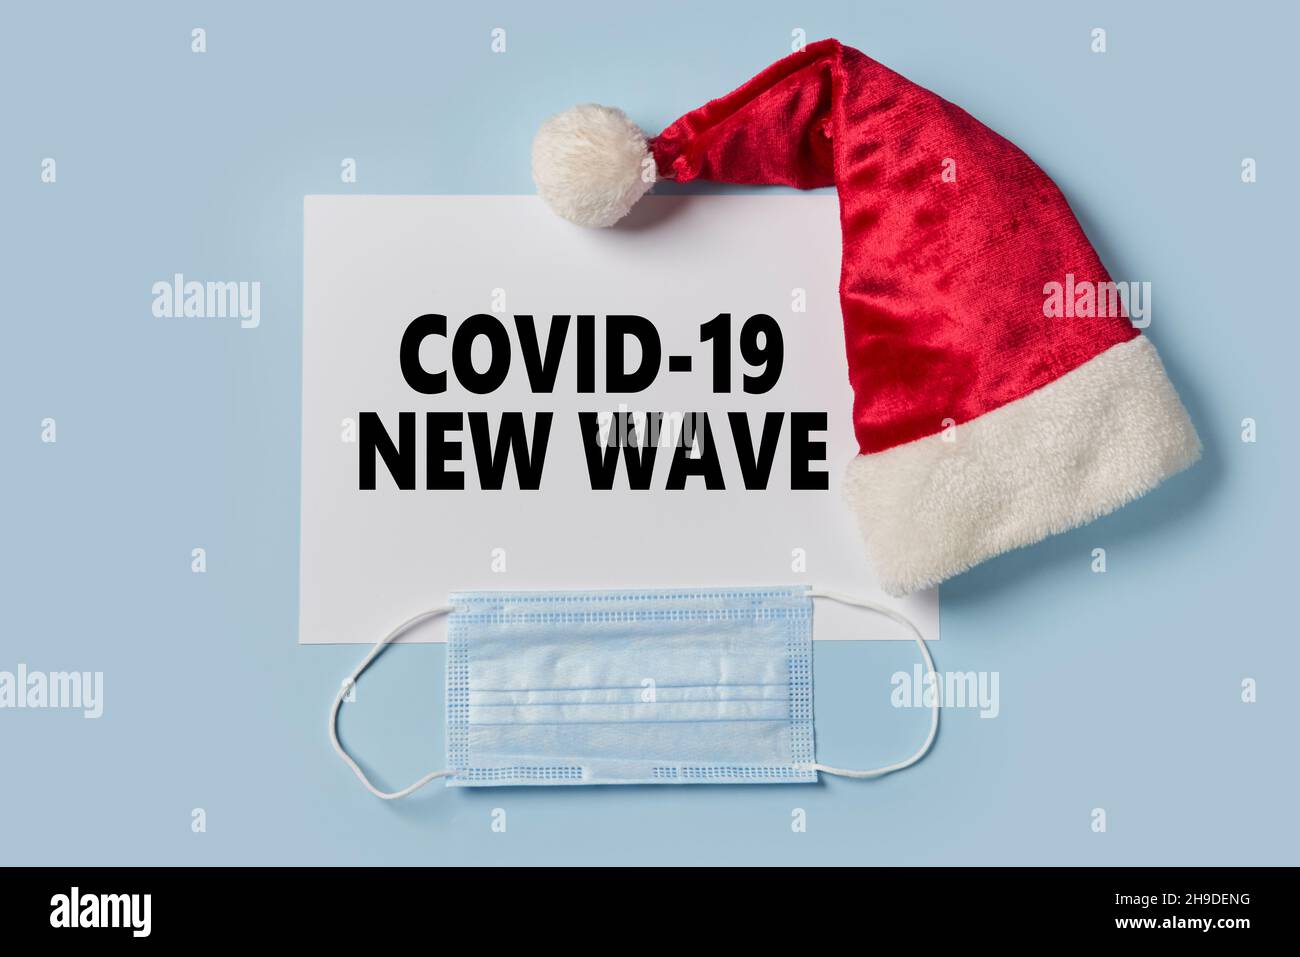 Covid-19 new wave during Christmas holidays. Santa Claus cap and surgical face mask. Coronavirus new wave text on paper and face mask. Lockdown Stock Photo